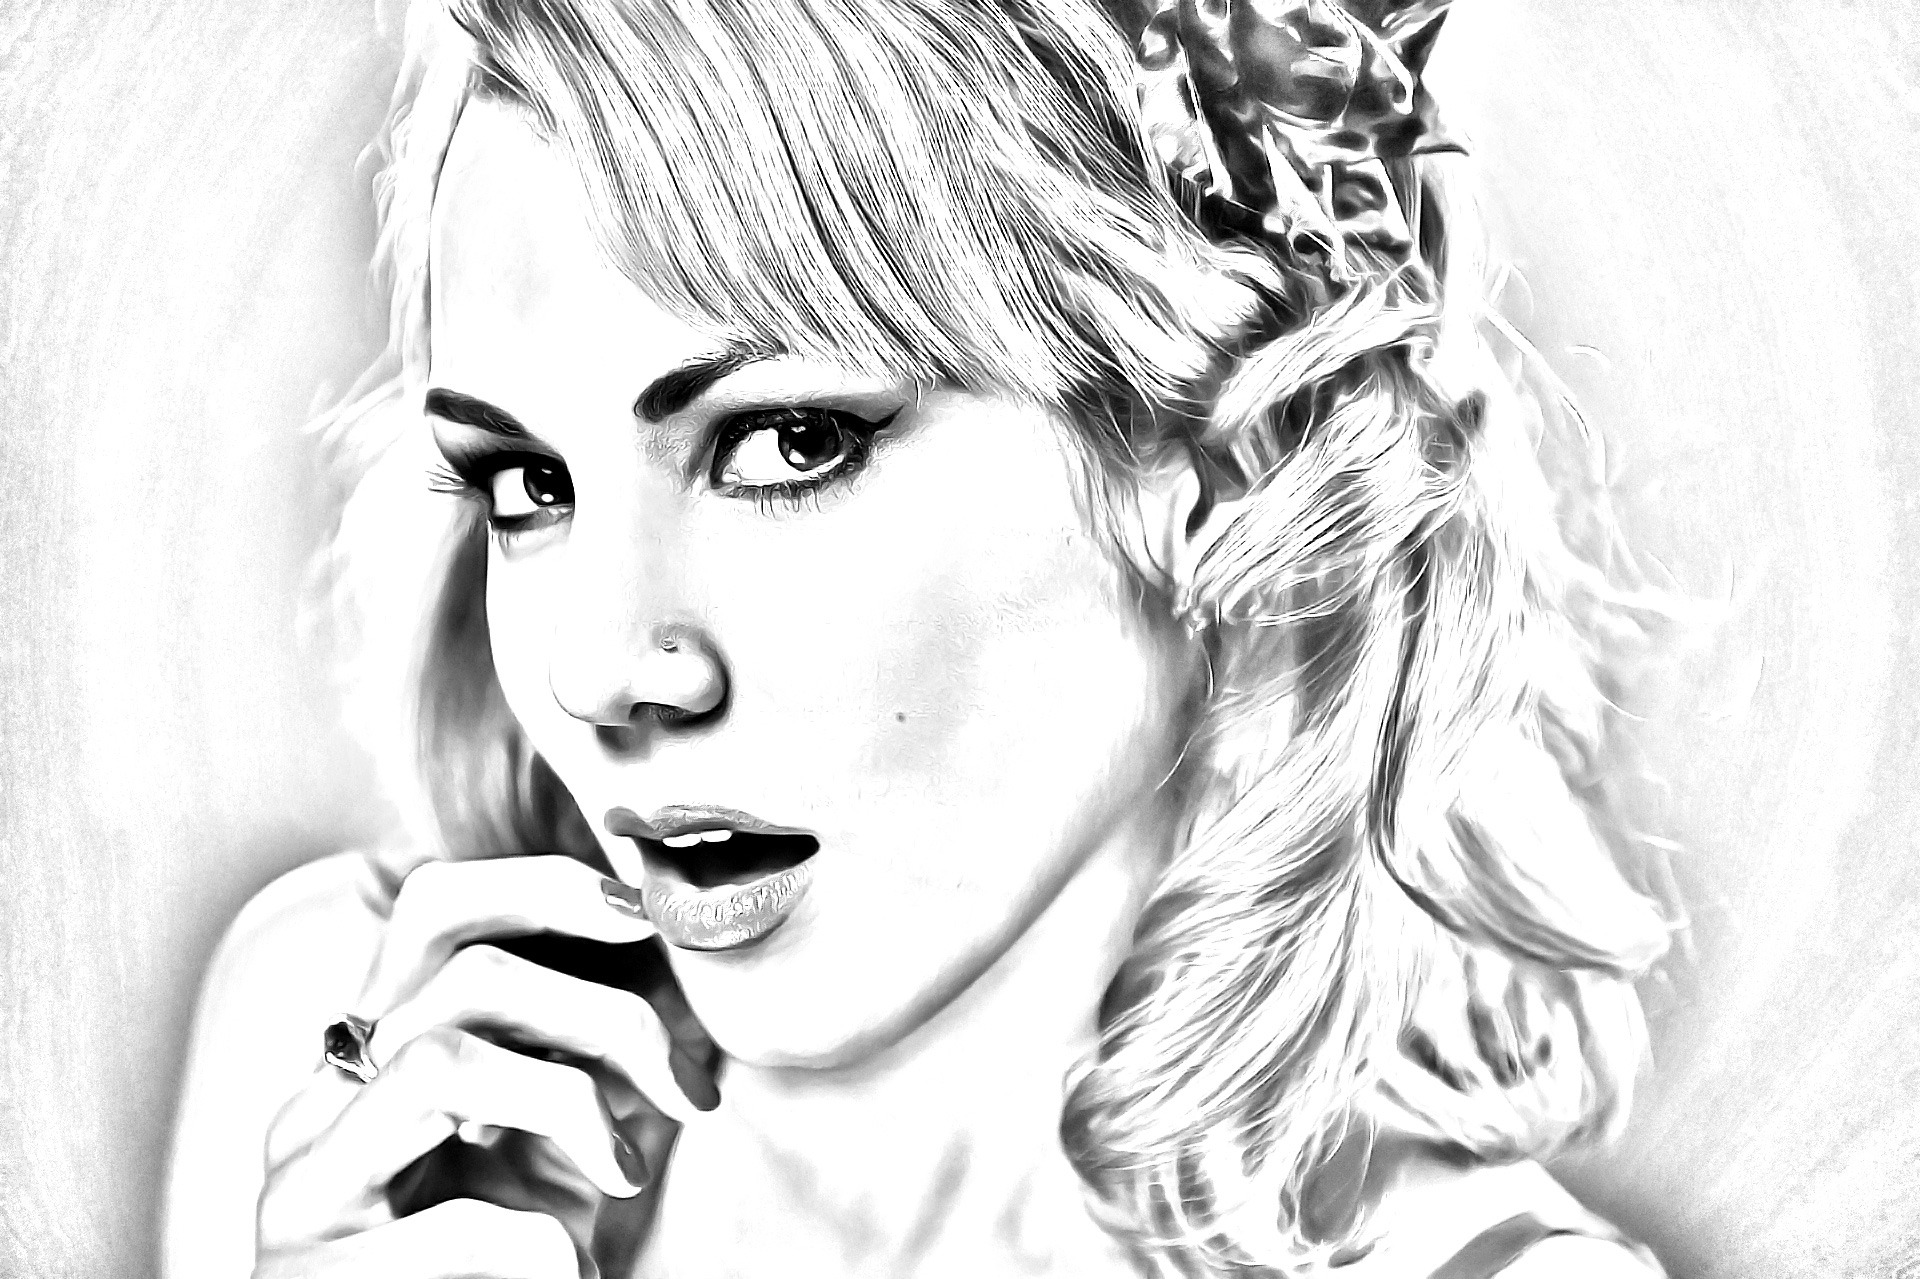 Sketch Effect In Photoshop Pencil Drawings Photoshop Photoshop Tutorial ...